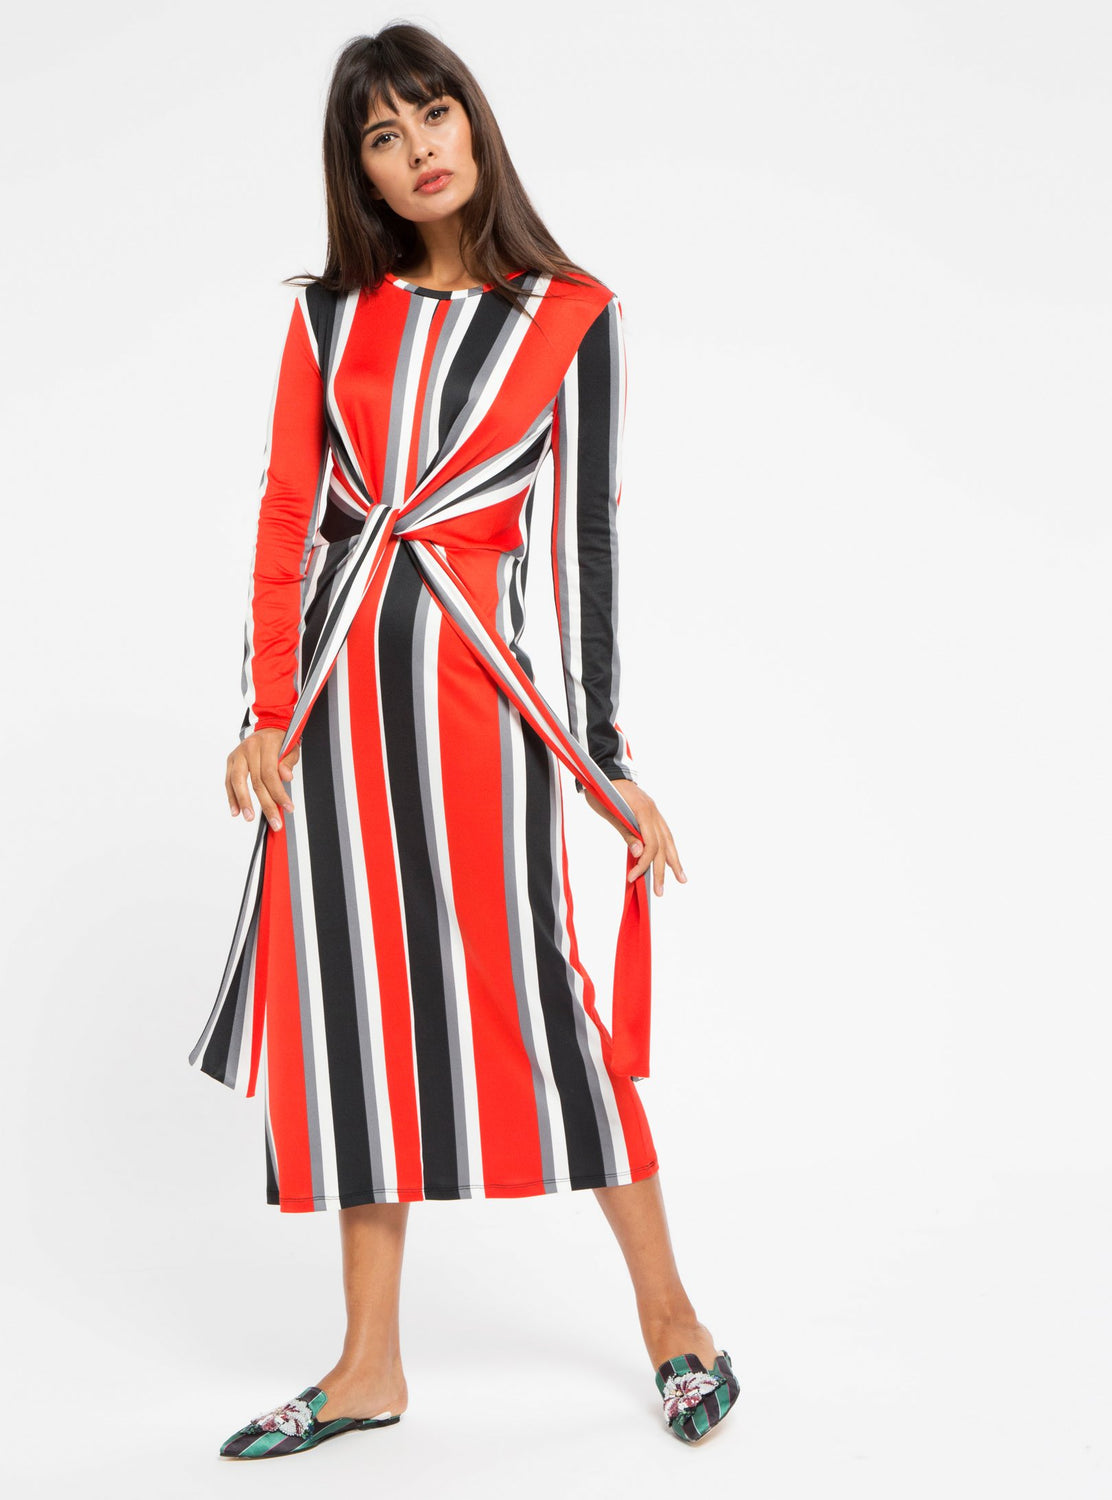 STORE WF Red Tie Front Stripe Midi Dress Modest Stripe Midi Dress with Long Sleeves and Tie Front in Red